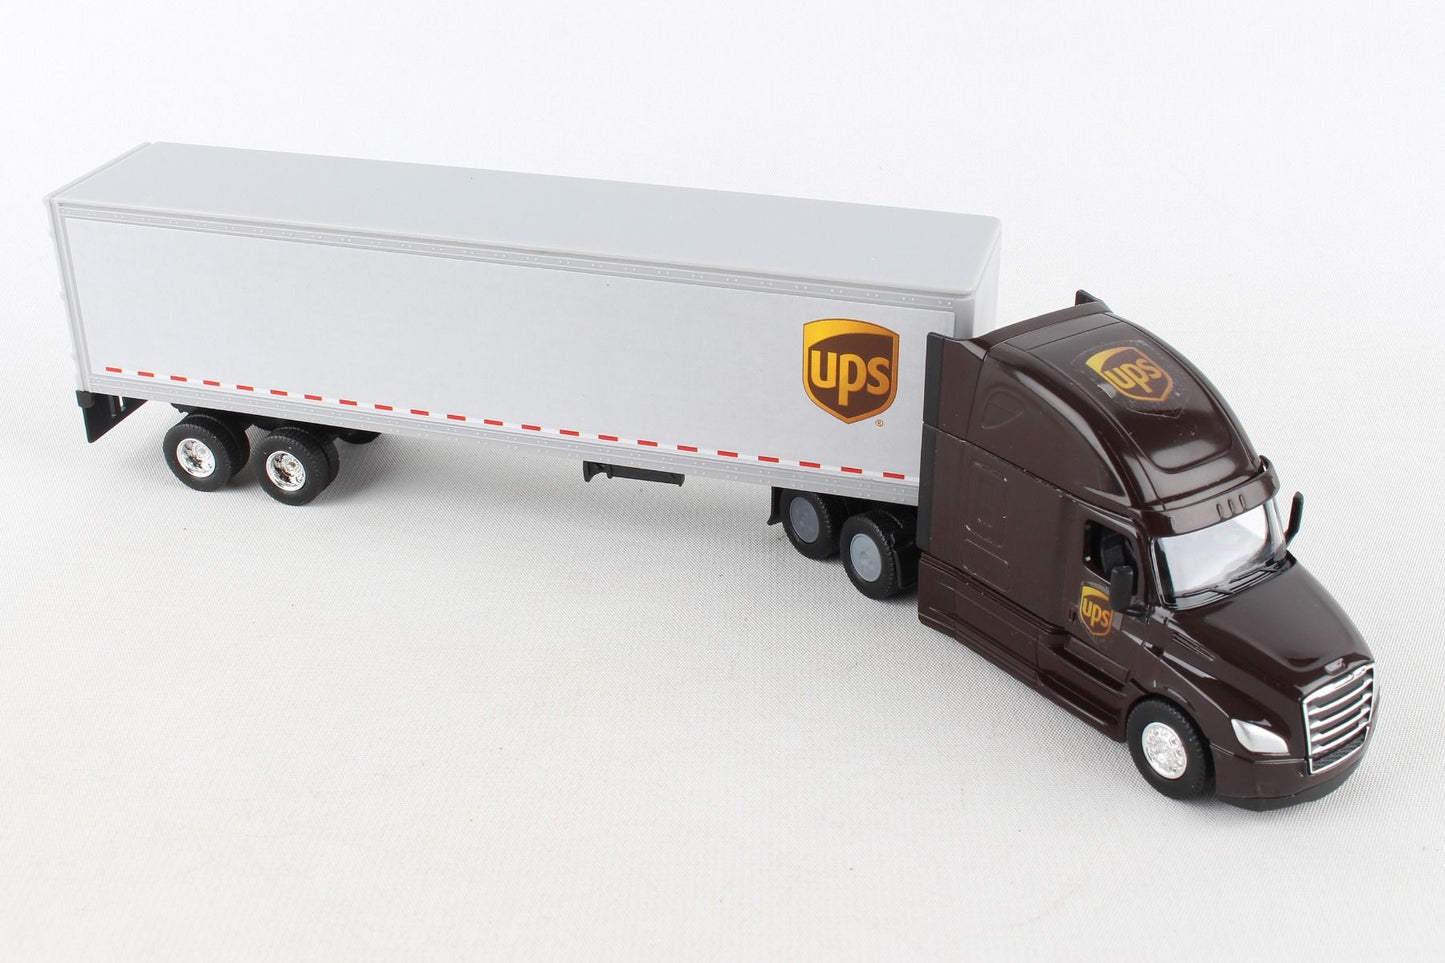 1/64 UPS Freightliner Tractor Trailer - Great Vehicle Collector Fan Gift